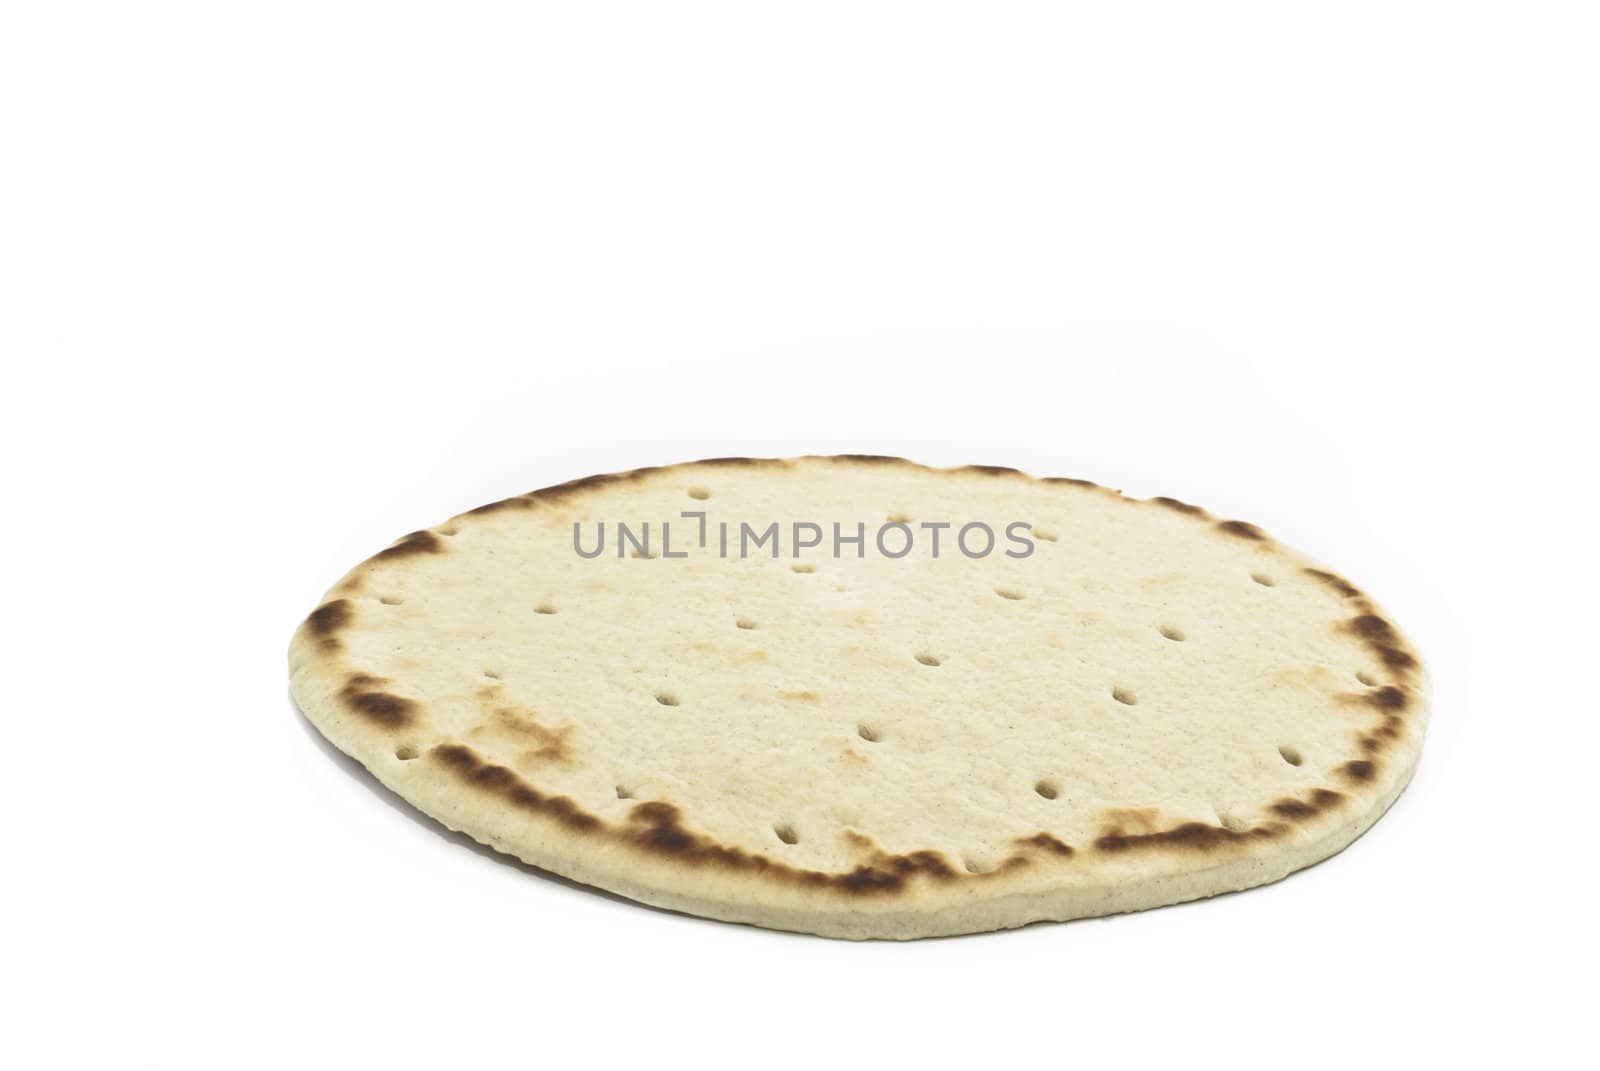 Piadina. Browse of wheat flour, traditional Italian product.